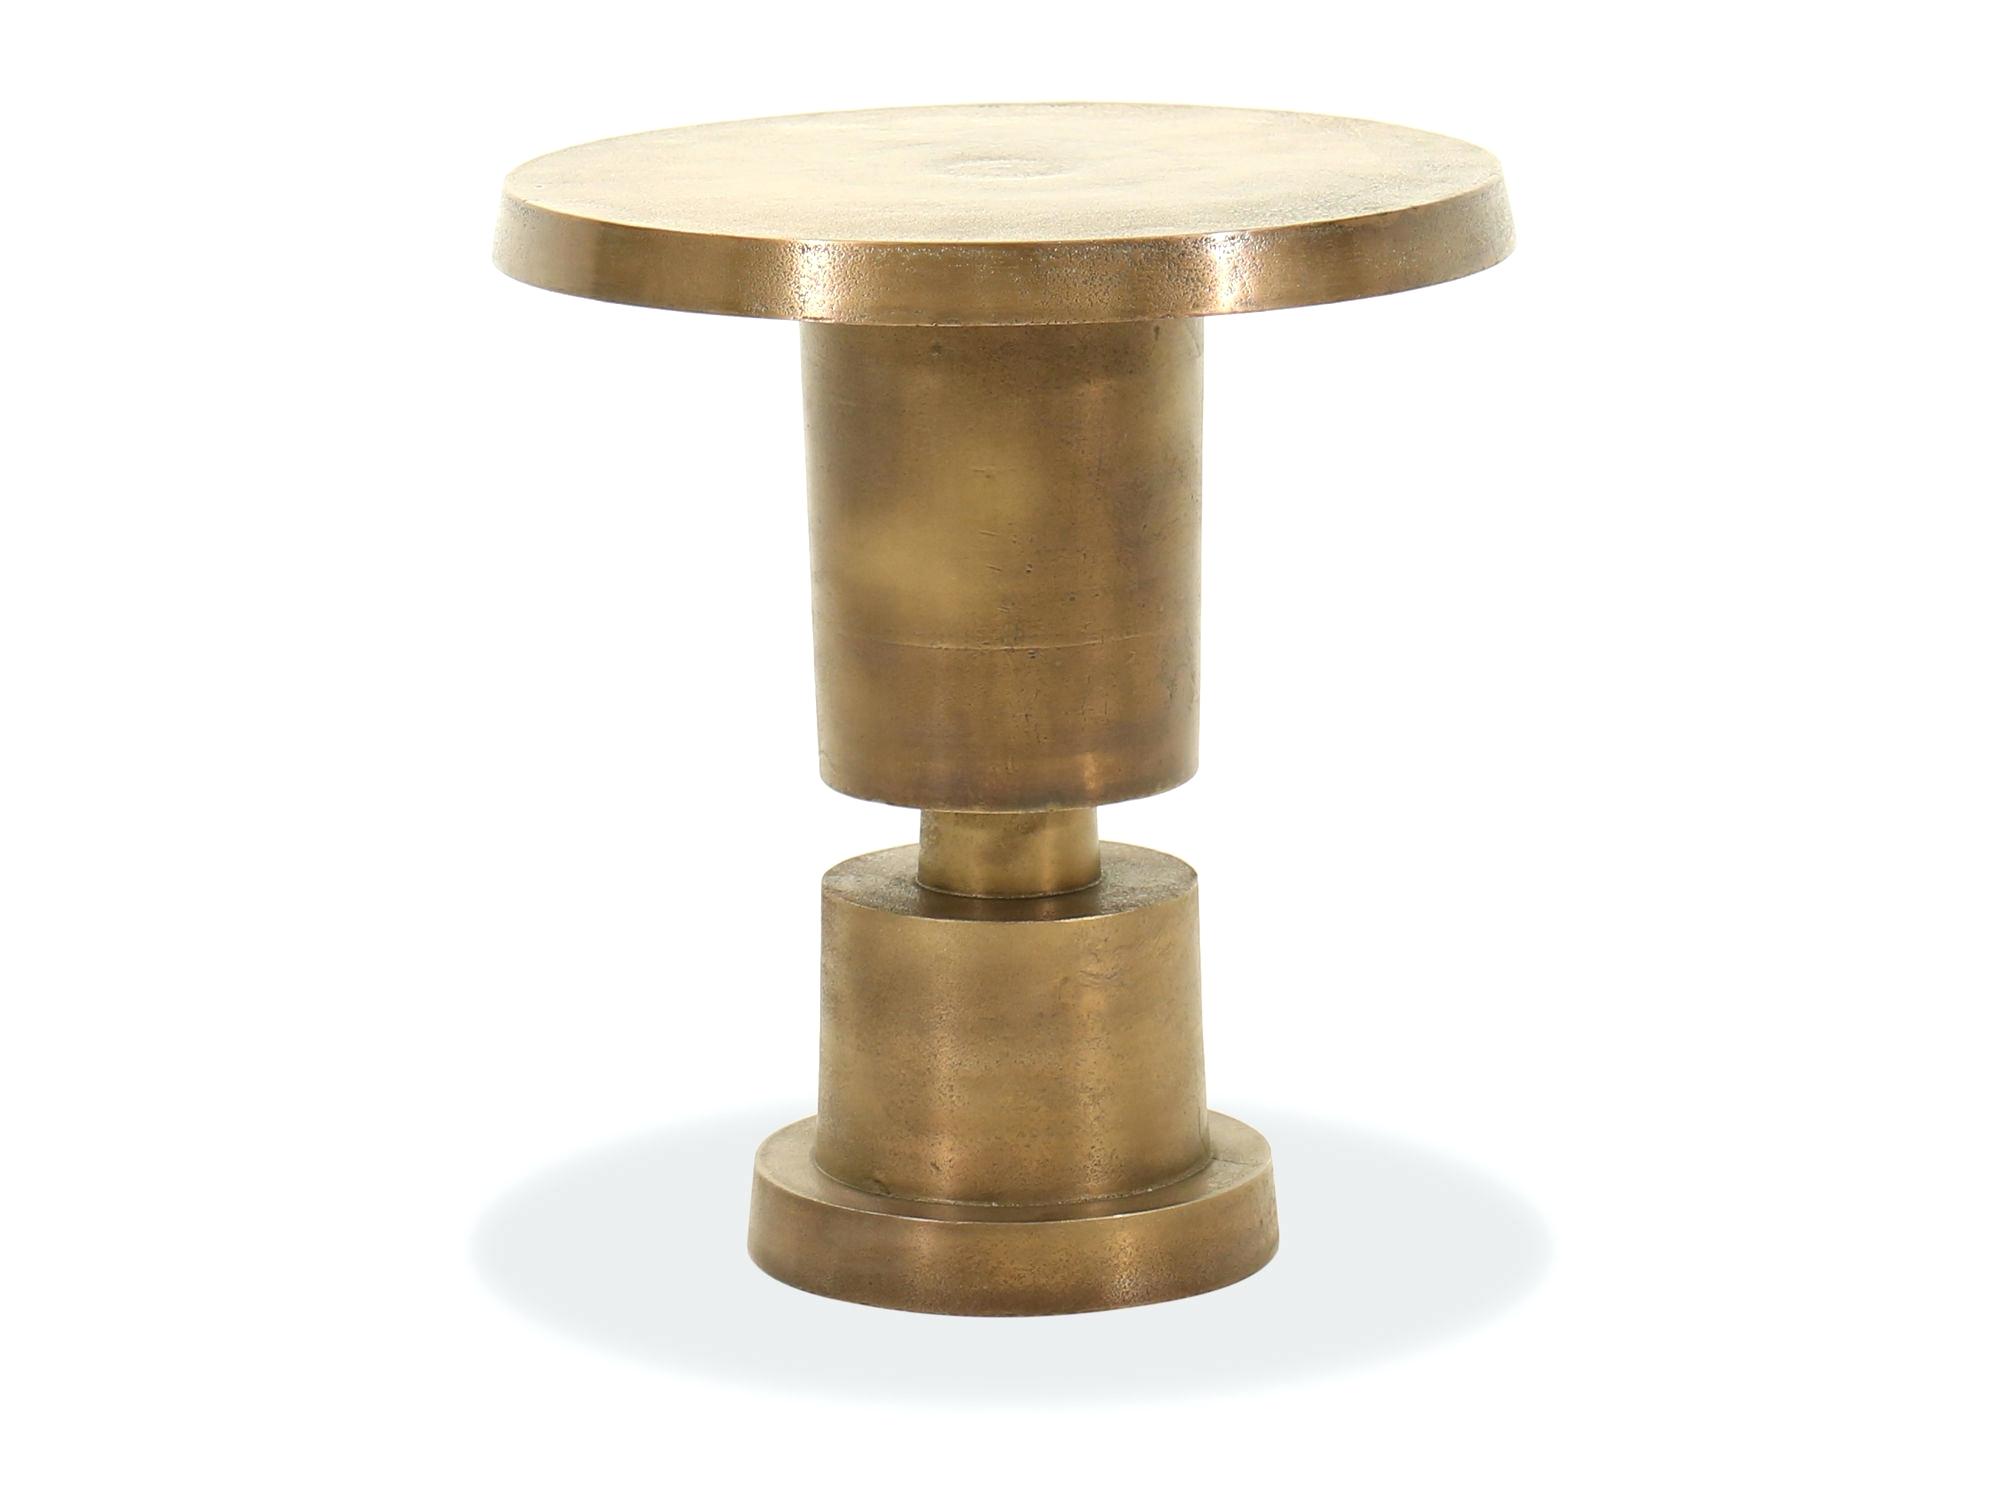 gold cala hammered drum accent table awesome furniture for wood conical base aluminum brothers kitchen marvelous cylindrical full size folding snack narrow end reclaimed oval